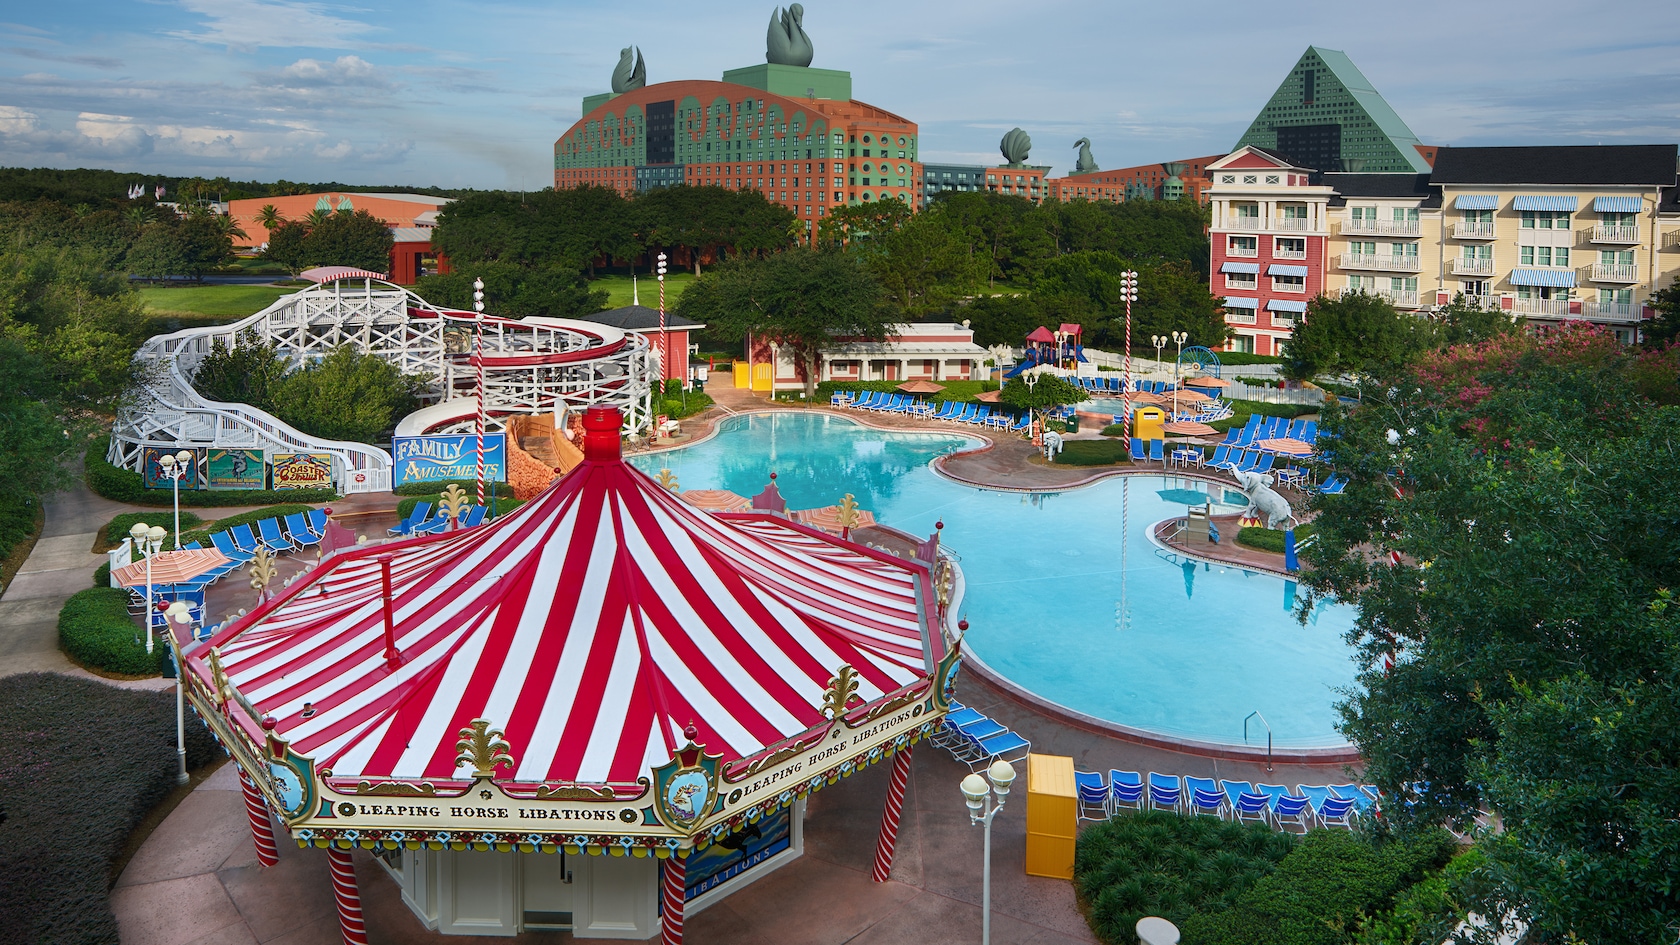 The pool area of Disney's BoardWalk Inn featuring 2 multistory buildings, leafy trees, a carousel shaped snack bar and a waterslide fashioned to look like a roller coaster